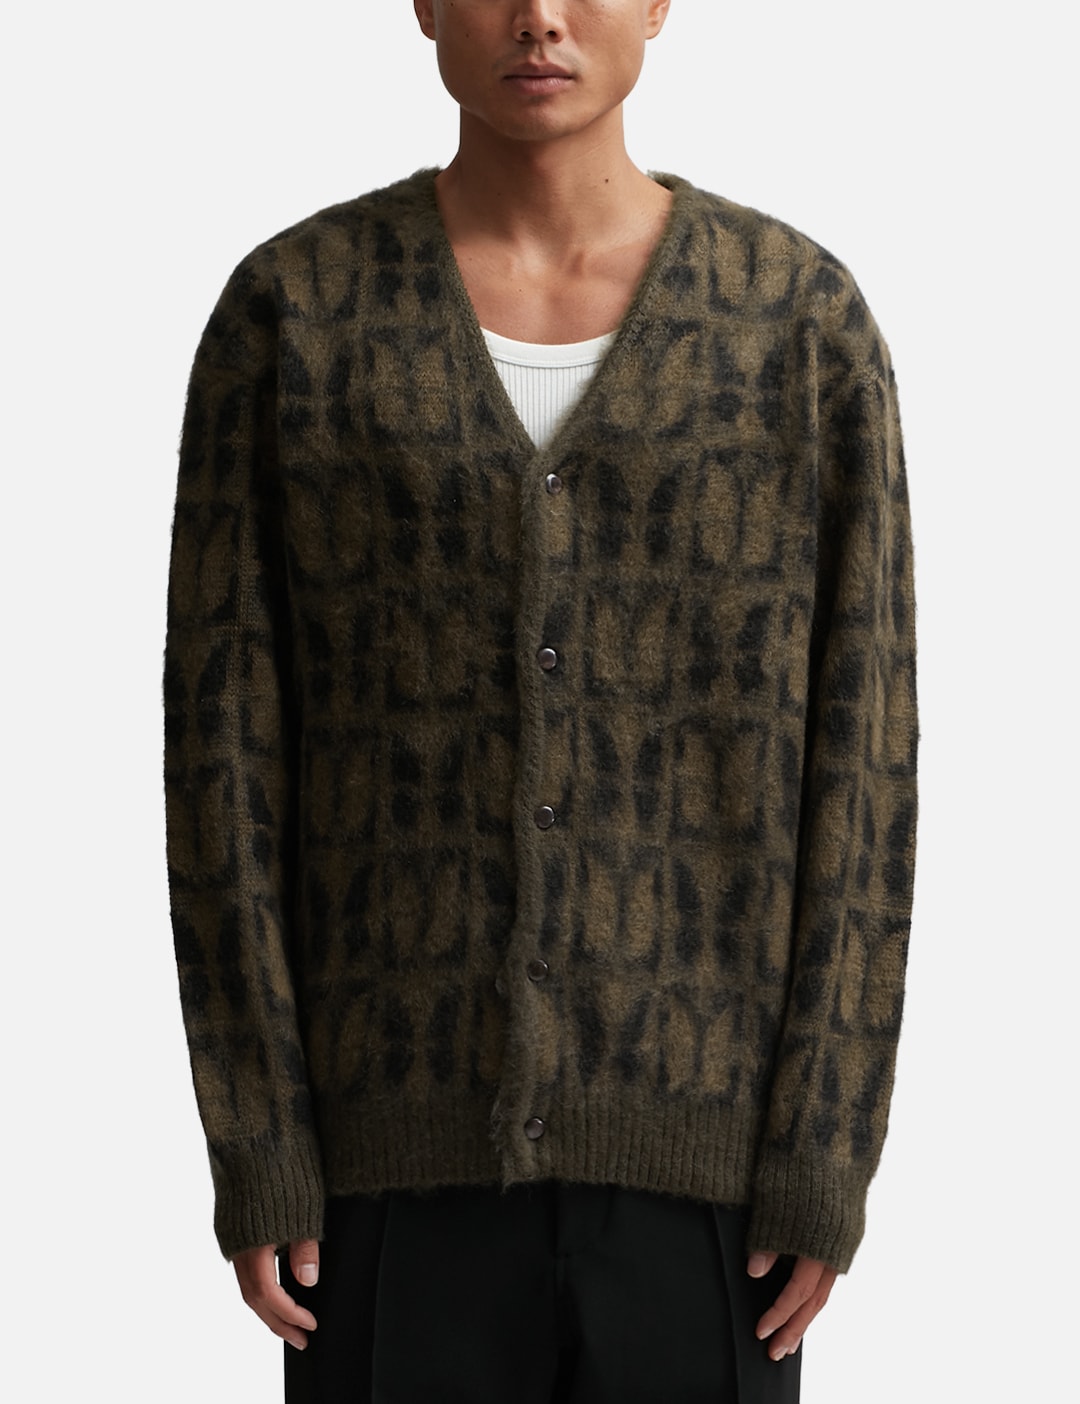 Sacai - Jacquard Knit Cardigan  HBX - Globally Curated Fashion and  Lifestyle by Hypebeast